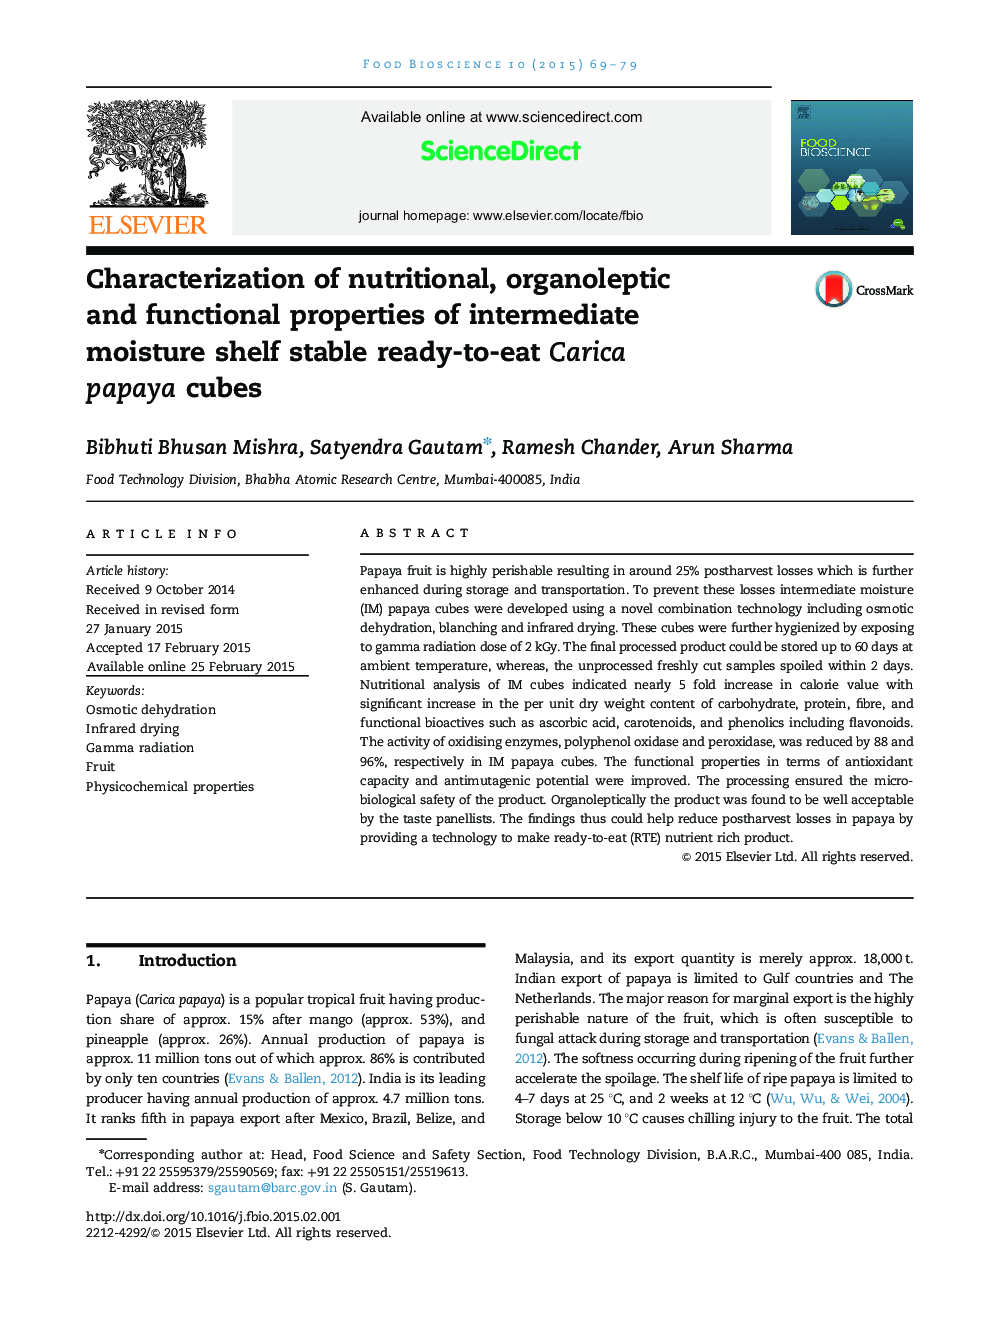 Characterization of nutritional, organoleptic and functional properties of intermediate moisture shelf stable ready-to-eat Carica papaya cubes